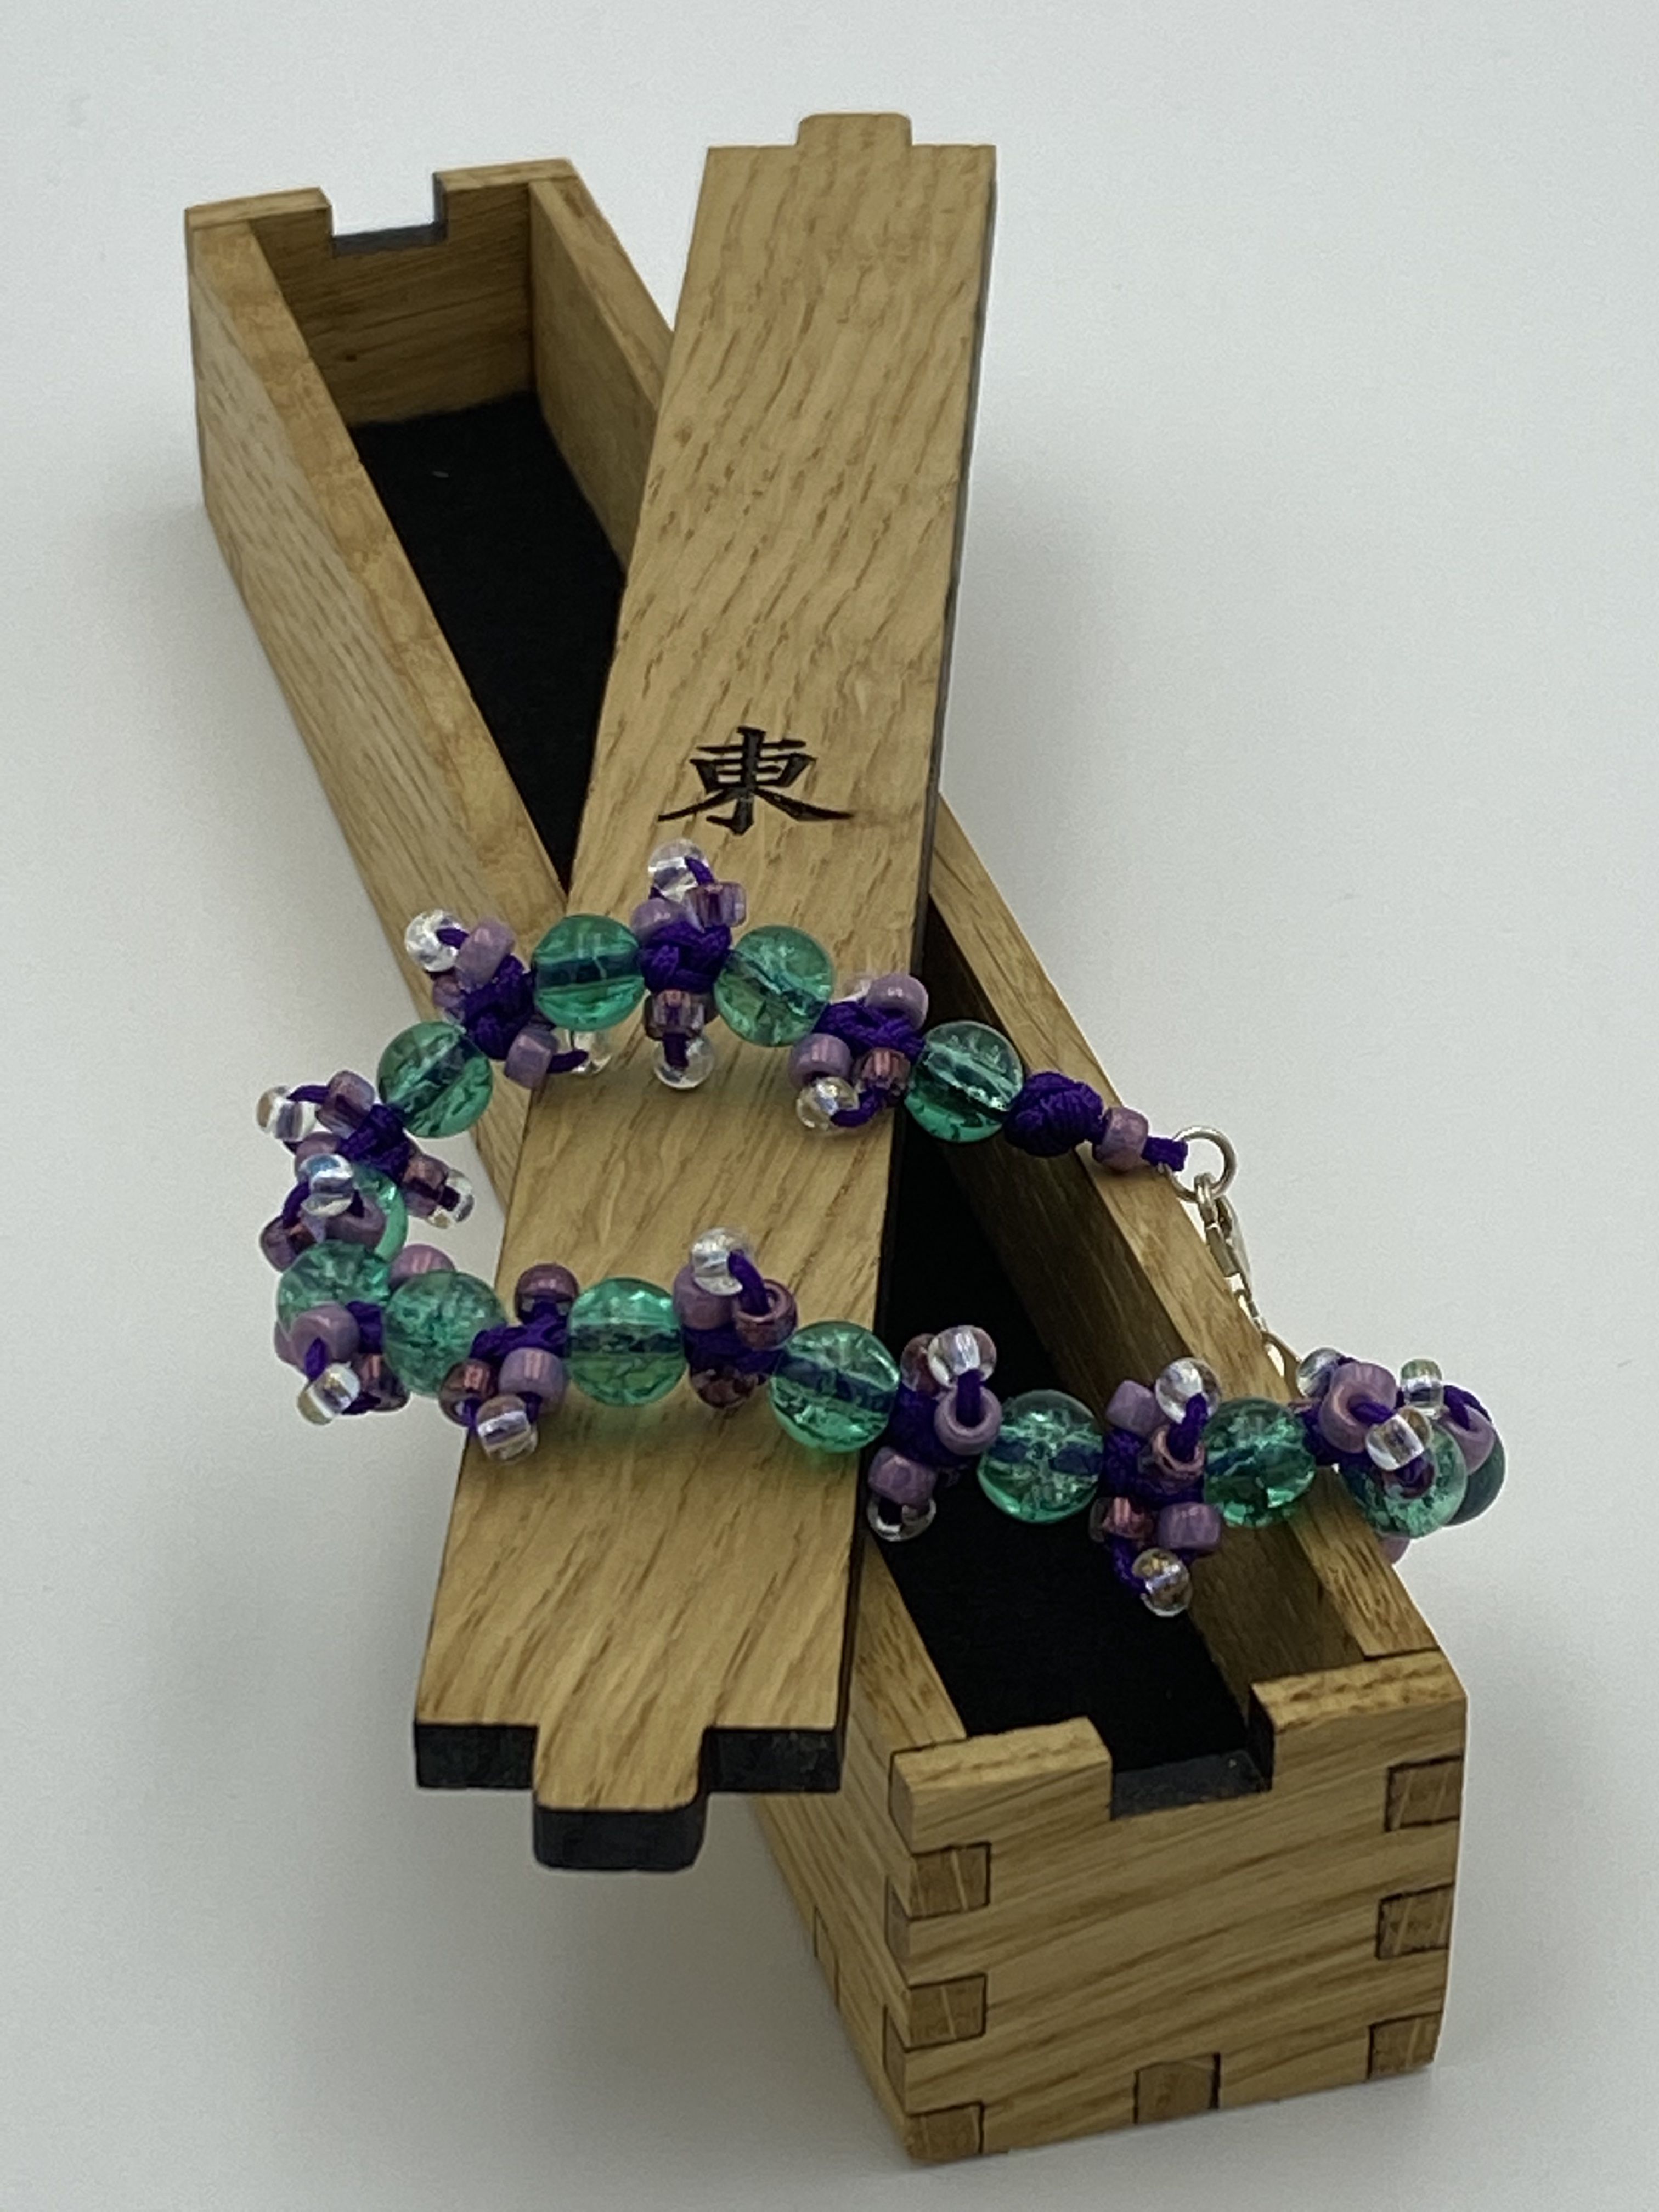 Chinese Knot Bracelet - Virtue Knot Bracelet - (Woven & Braided) - Includes a Wooden Presentation Box